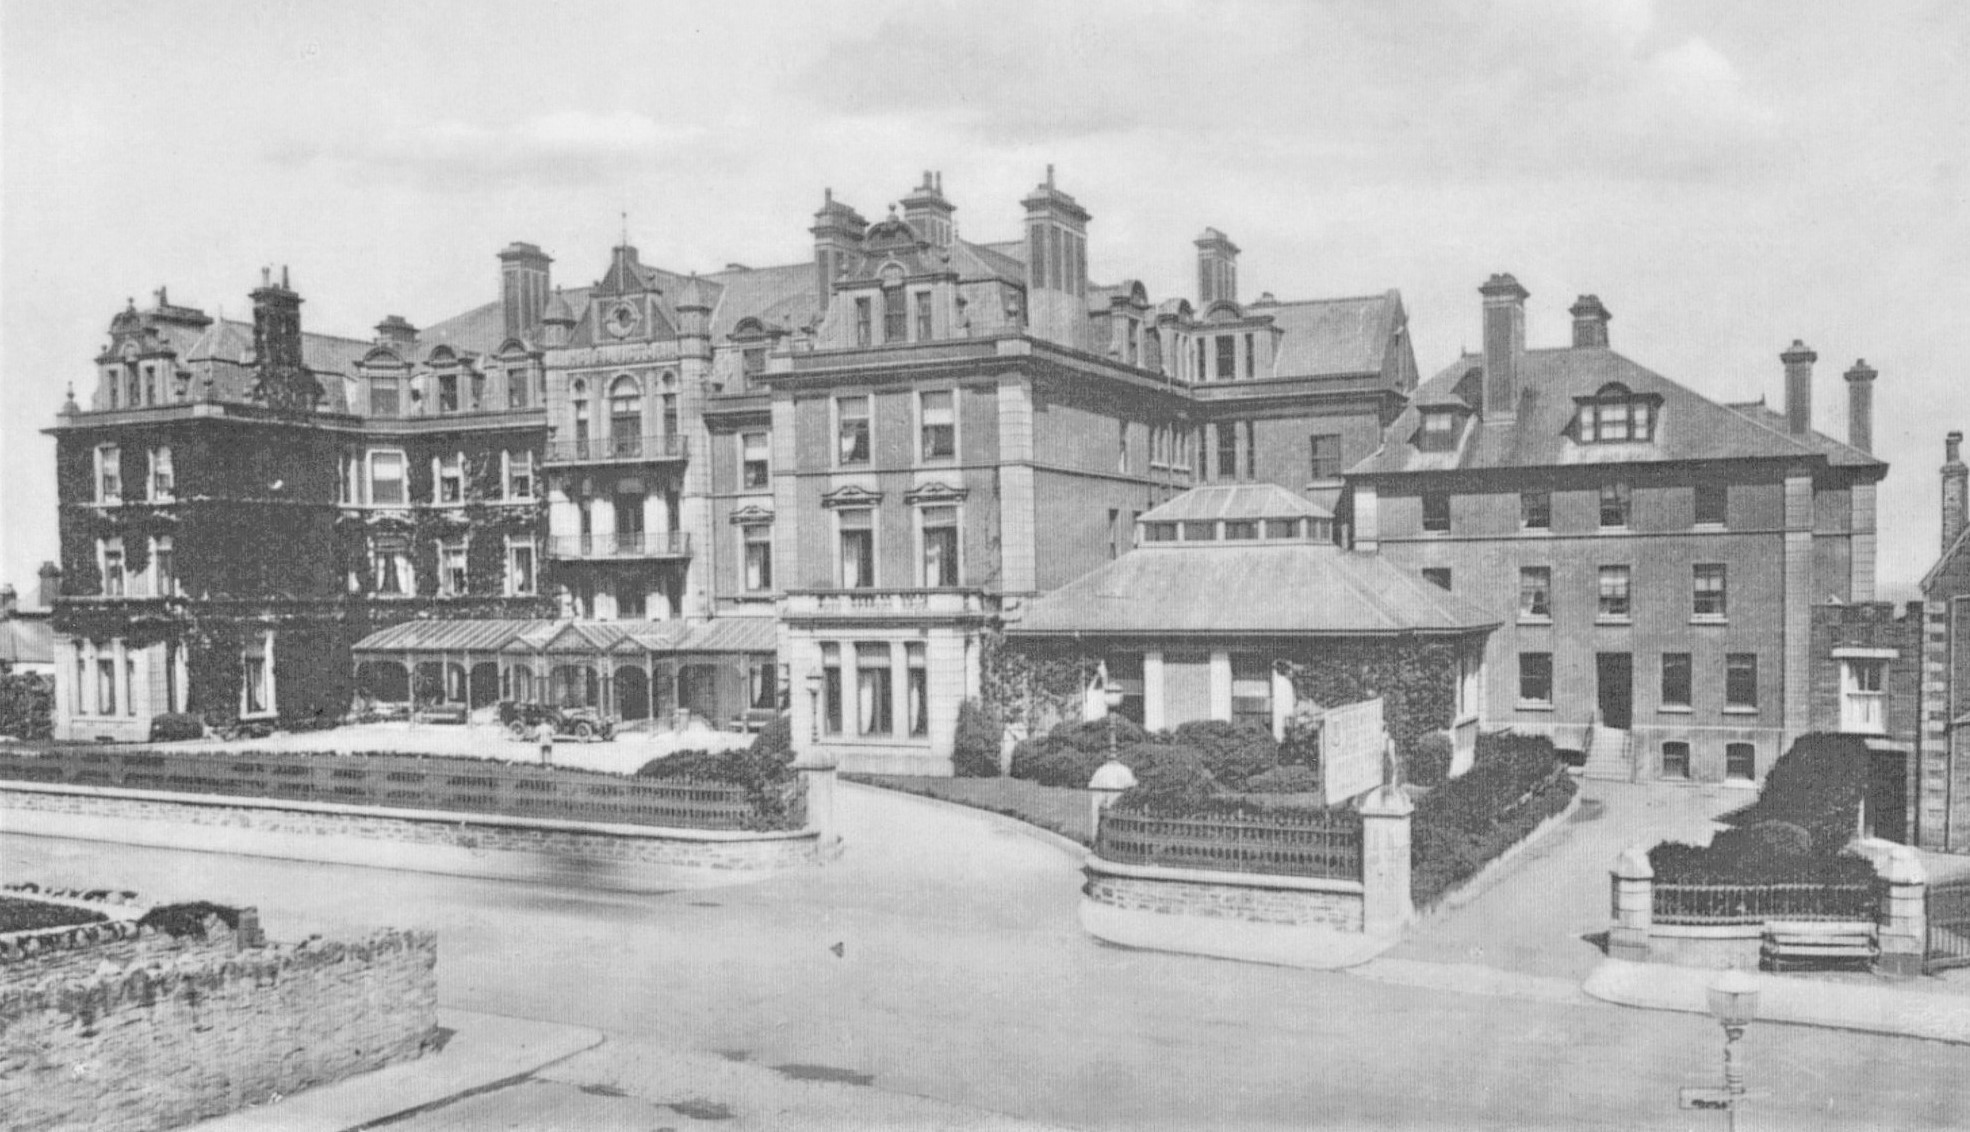 Victoria Hotel - Newquay early 20th century